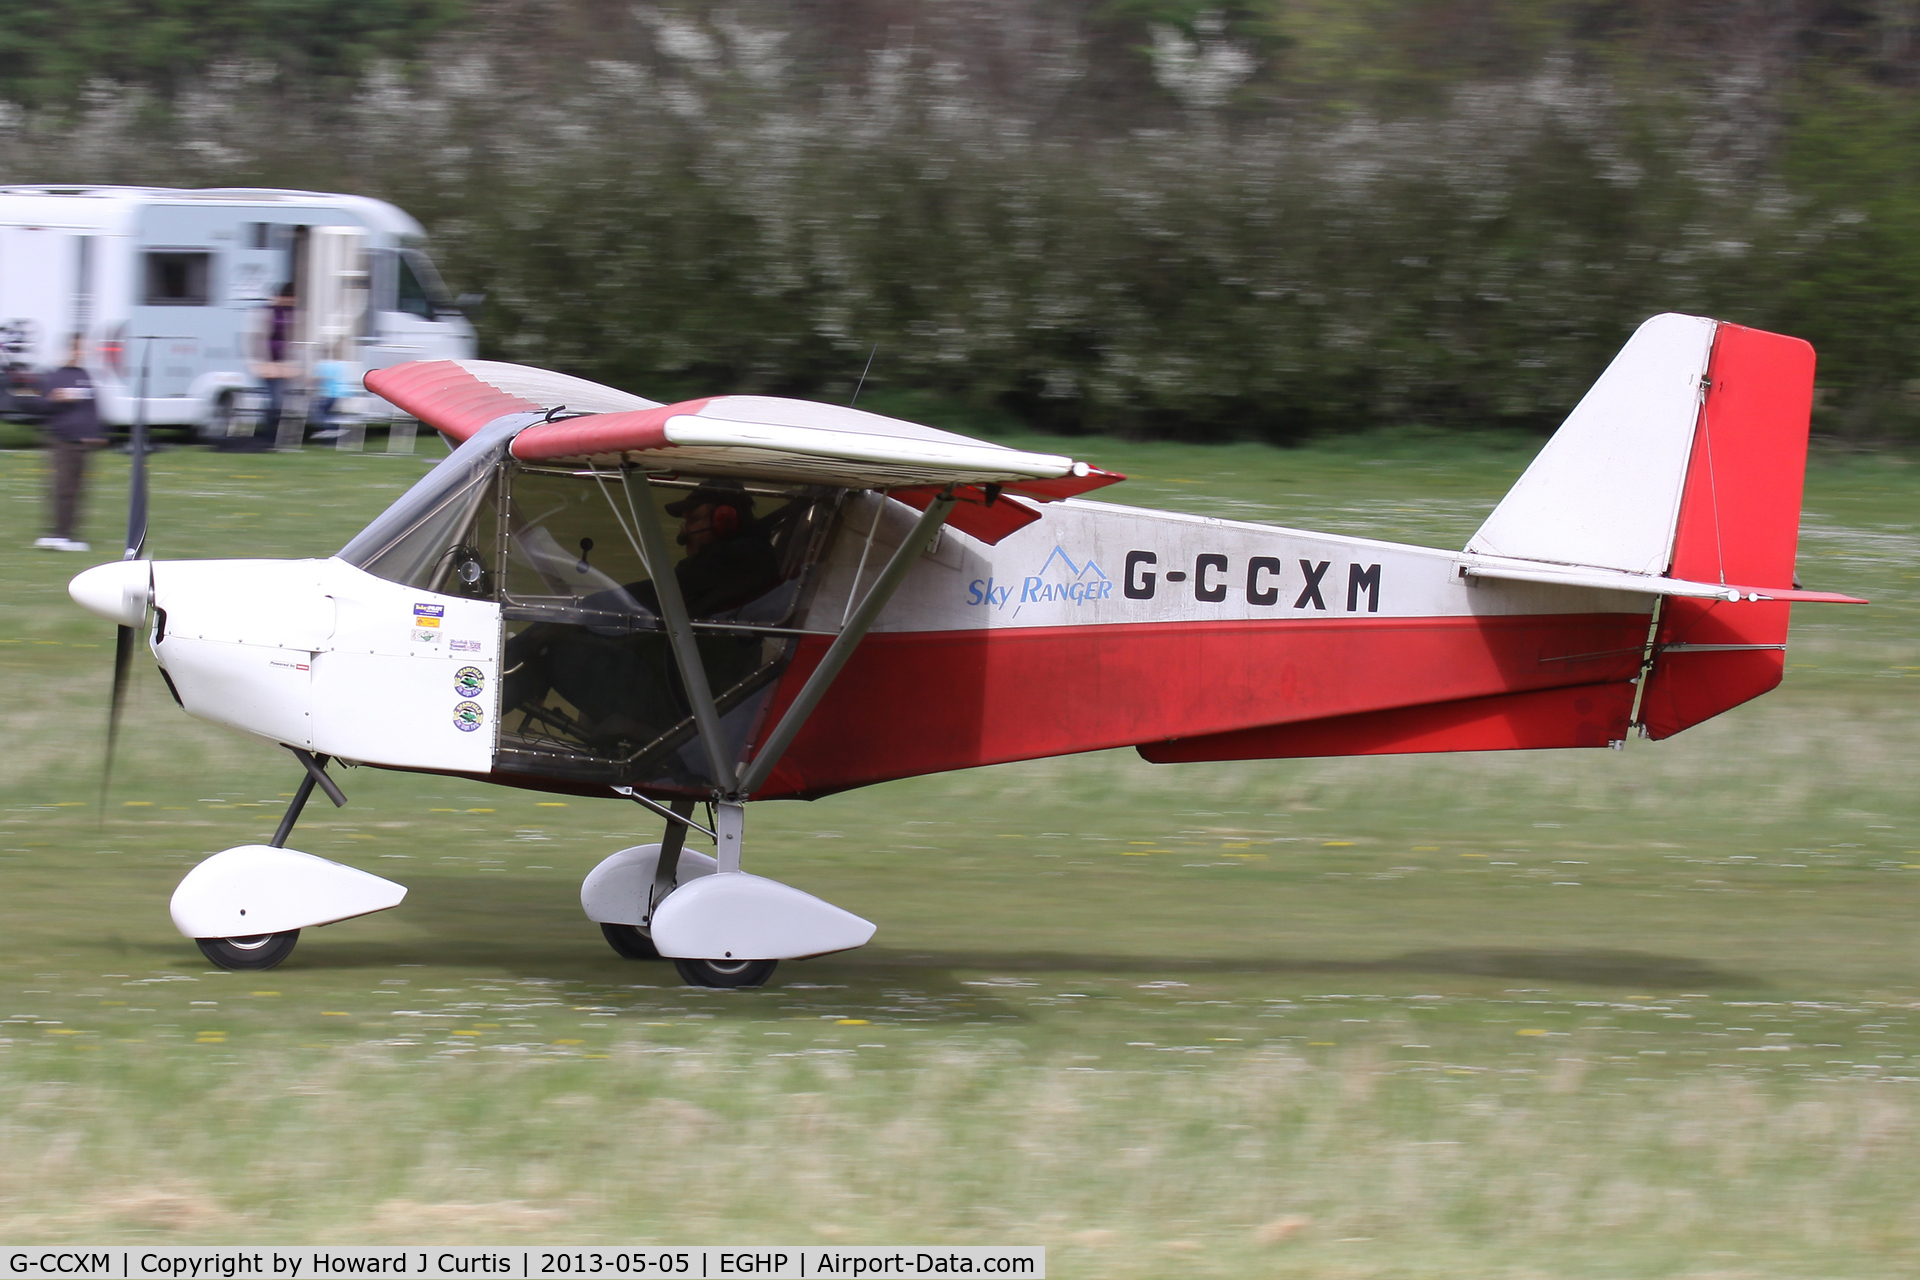 G-CCXM, 2004 Best Off Skyranger 912(2) C/N BMAA/HB/337, Privately owned, at the Microlight Trade Fair.